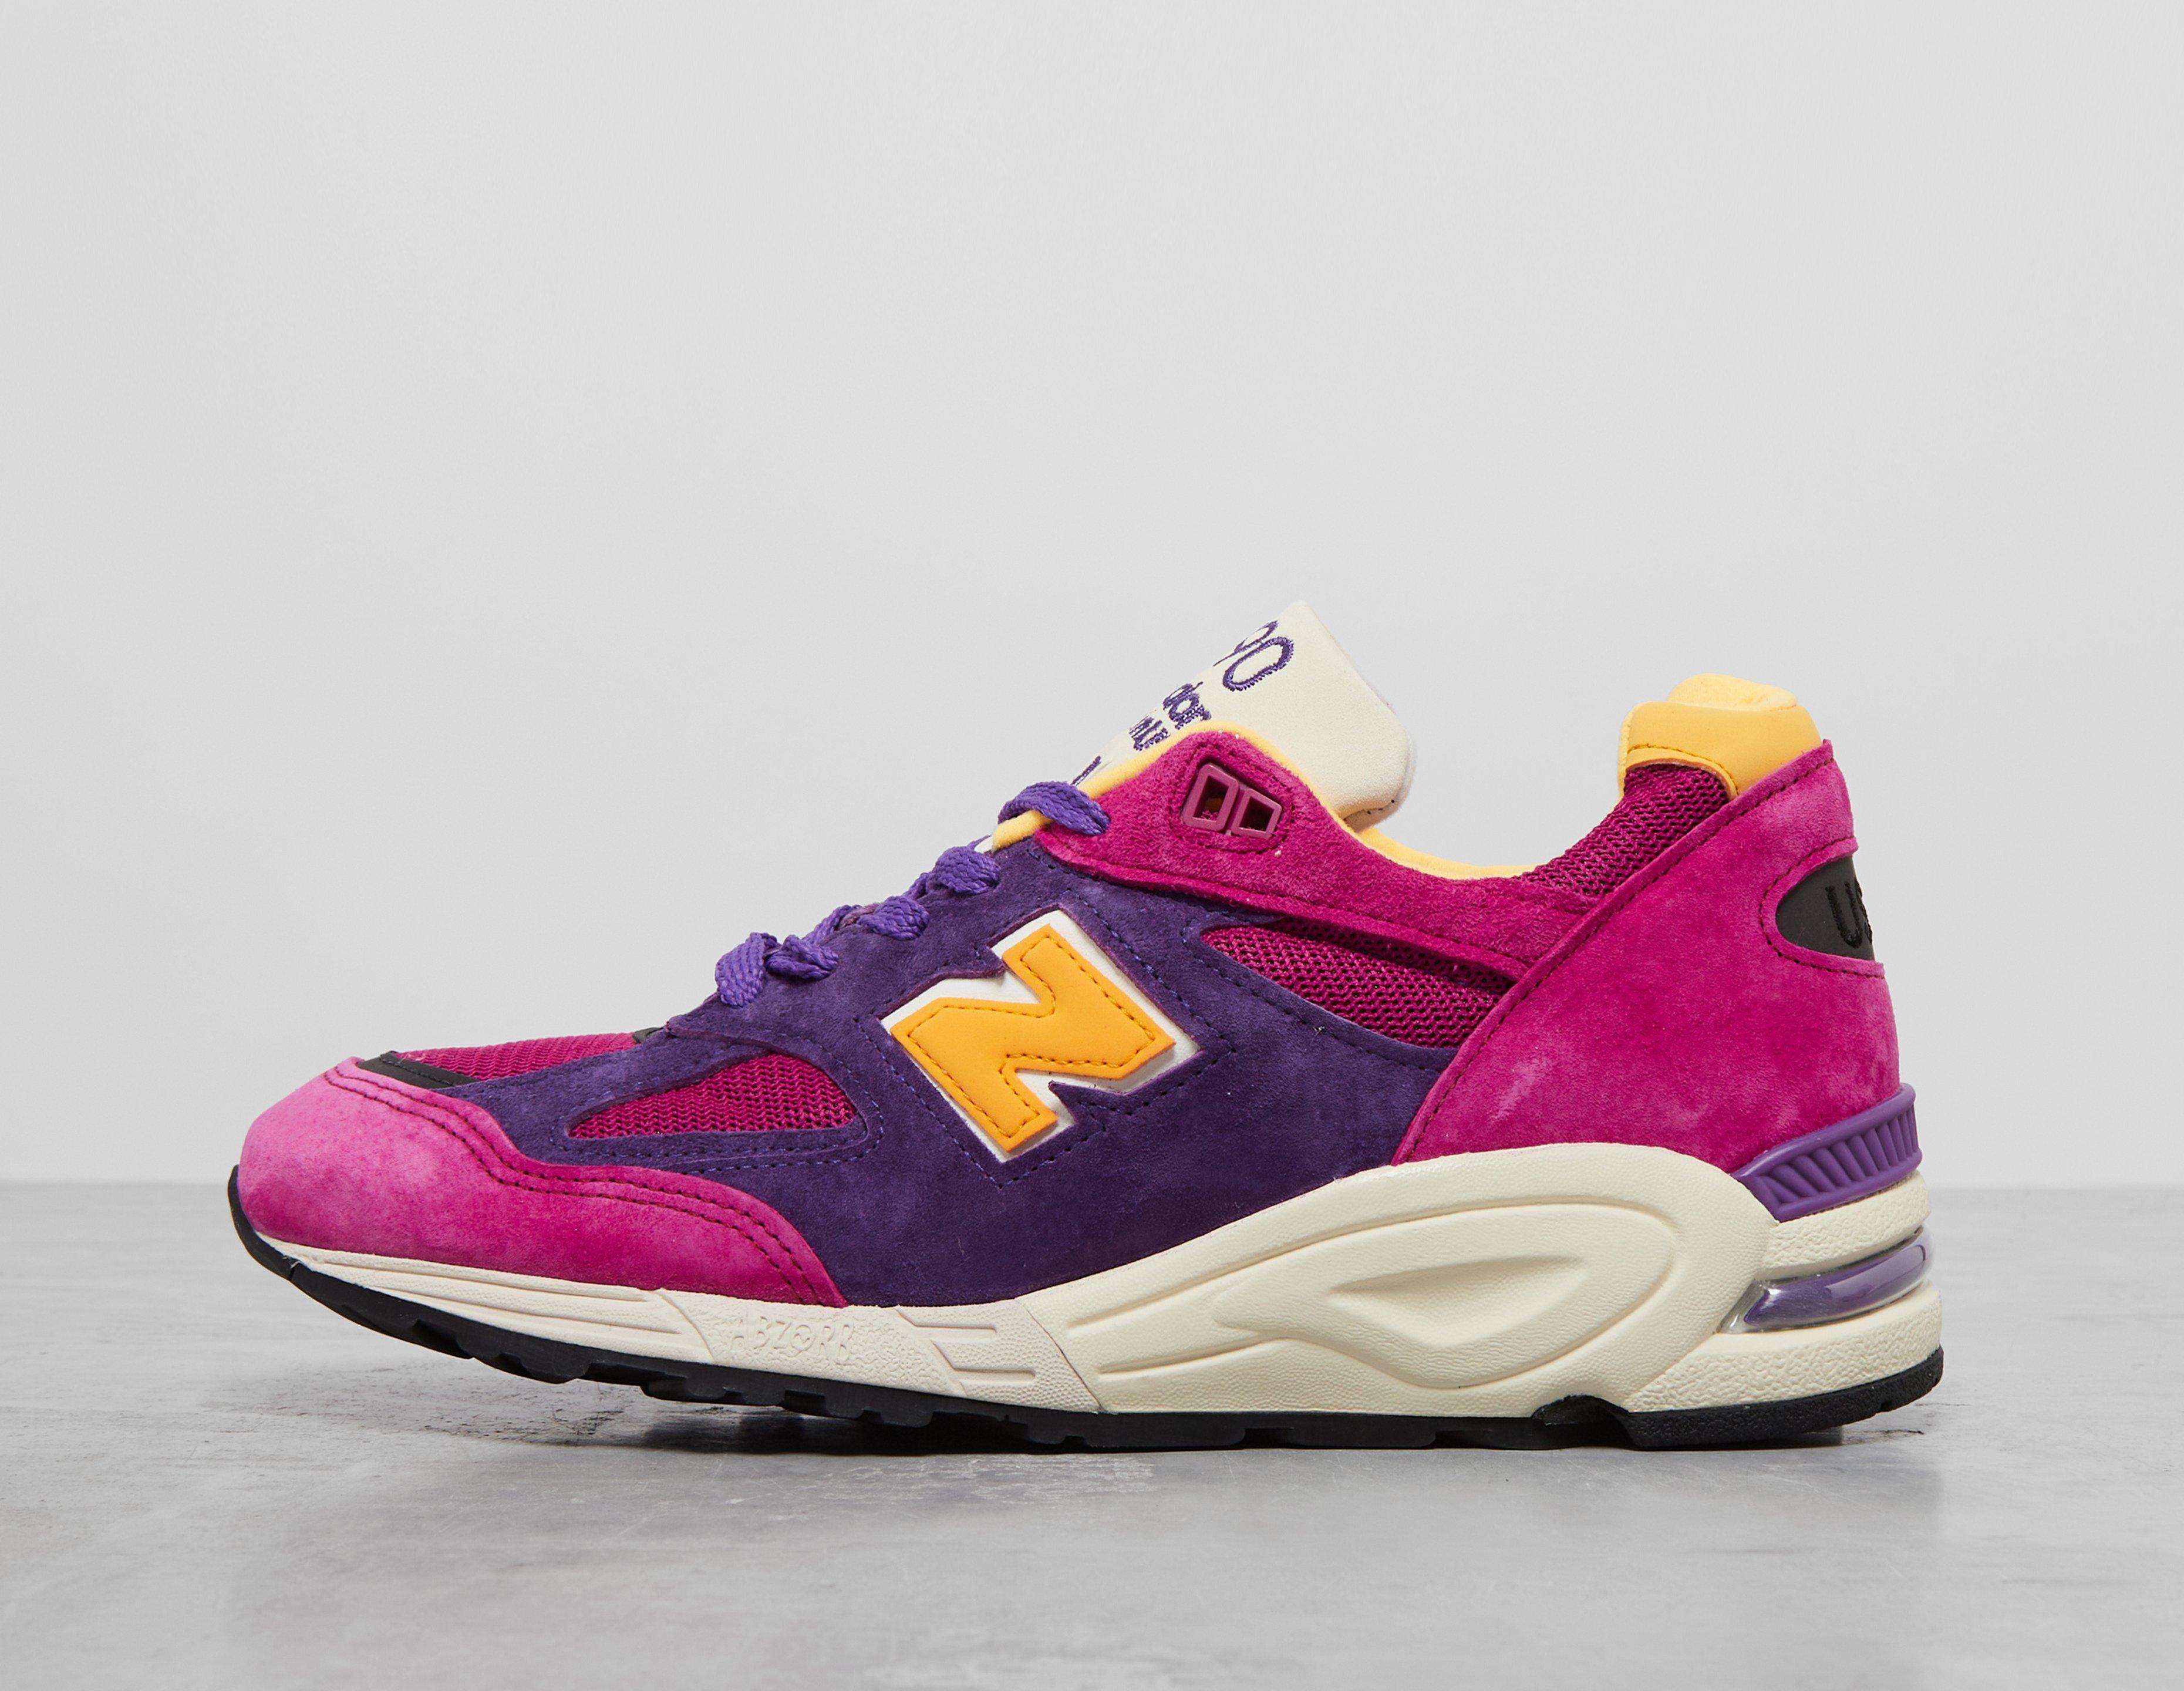 HealthdesignShops | New balance mens in New USA athletic Purple black 990v2 Made casual Balance core low | 574 lifestyle shoes sneakers